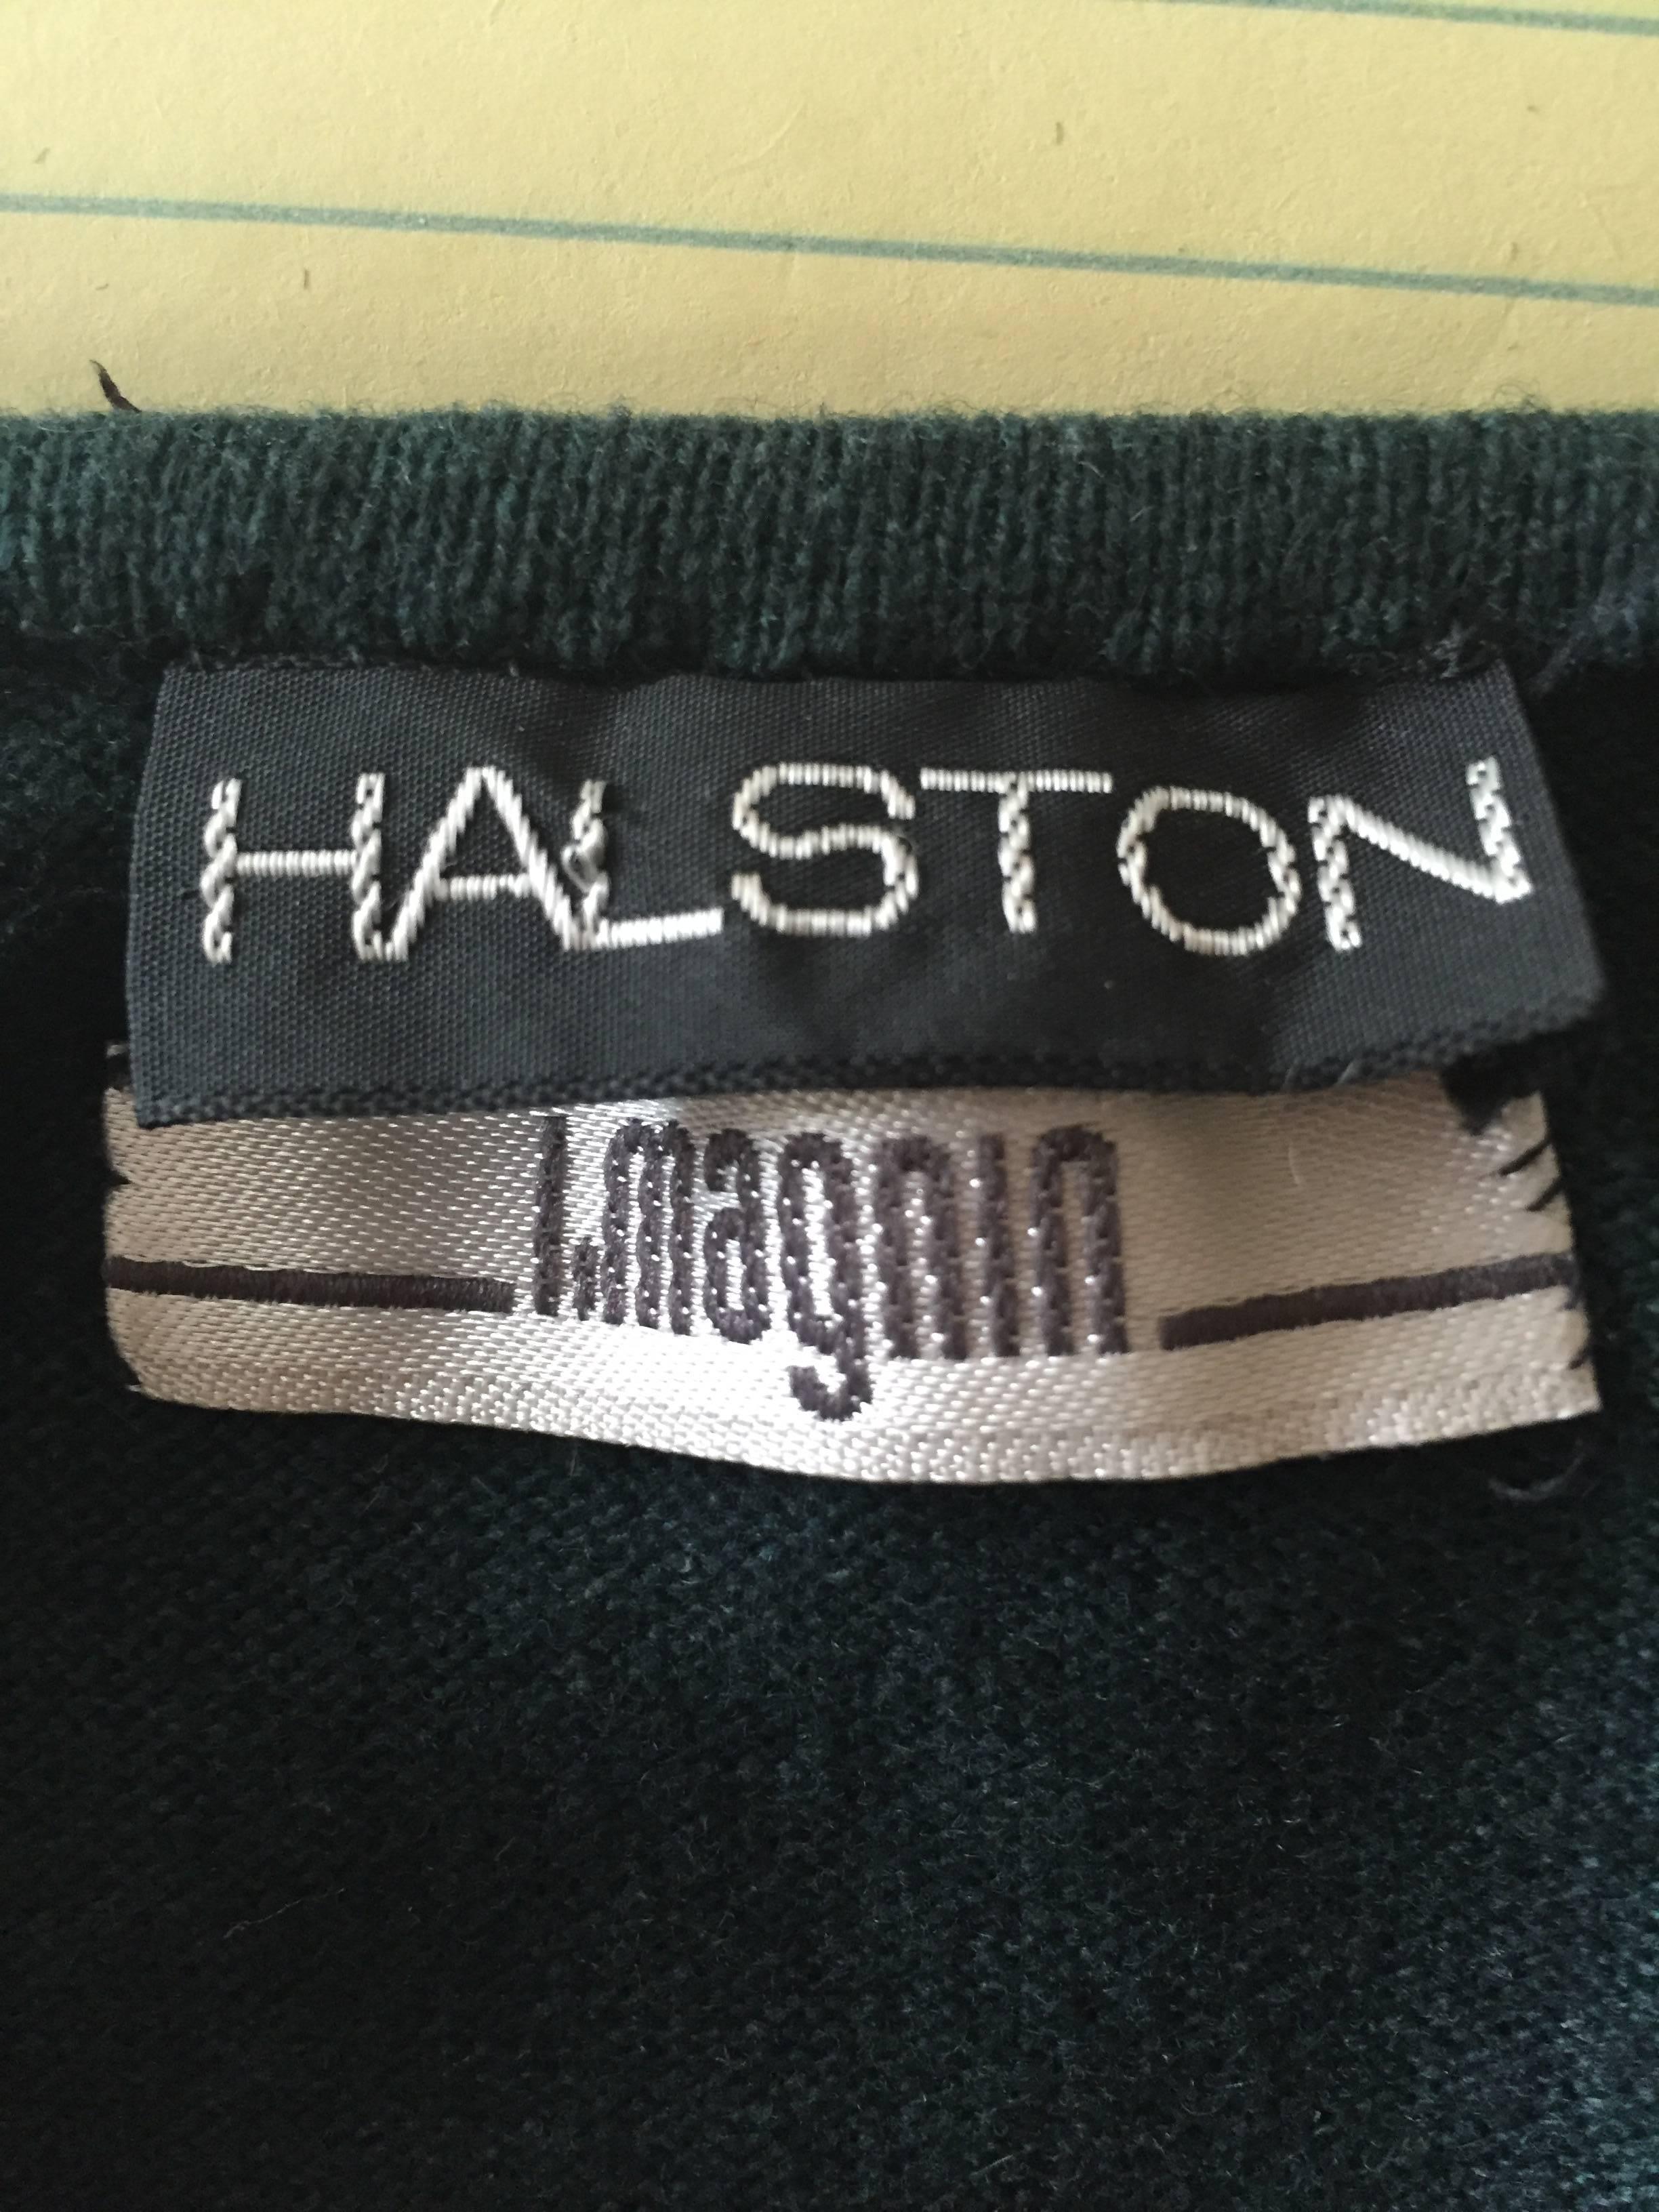 Halston Vintage 70's I. Magnin Cashmere Mini Dress In Excellent Condition For Sale In Cloverdale, CA